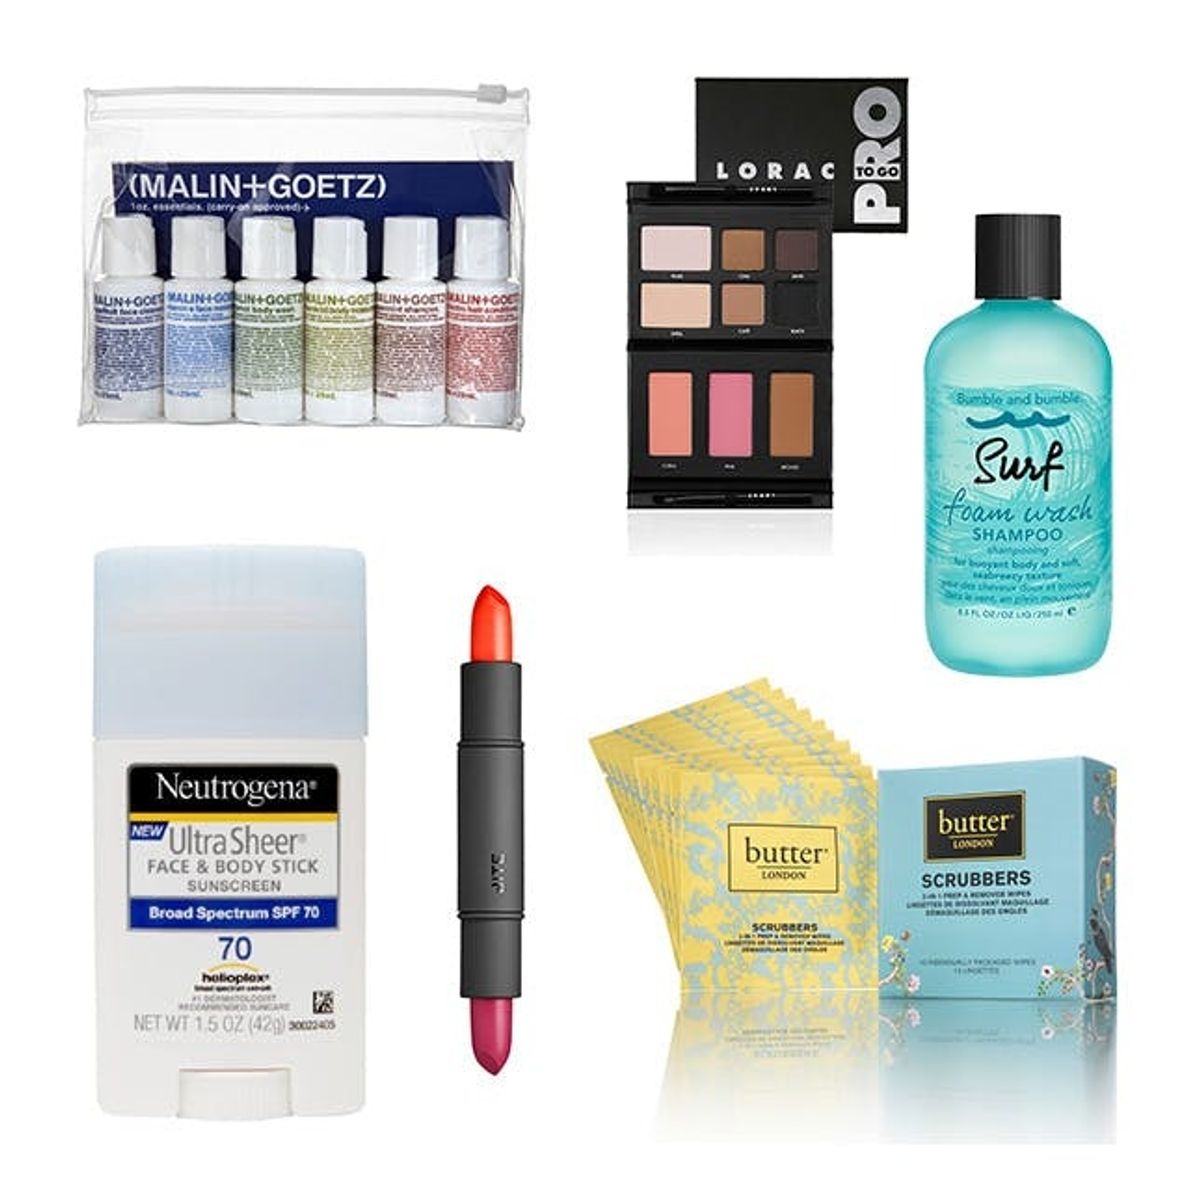 21 Travel Beauty Essentials for Your Next Vacay